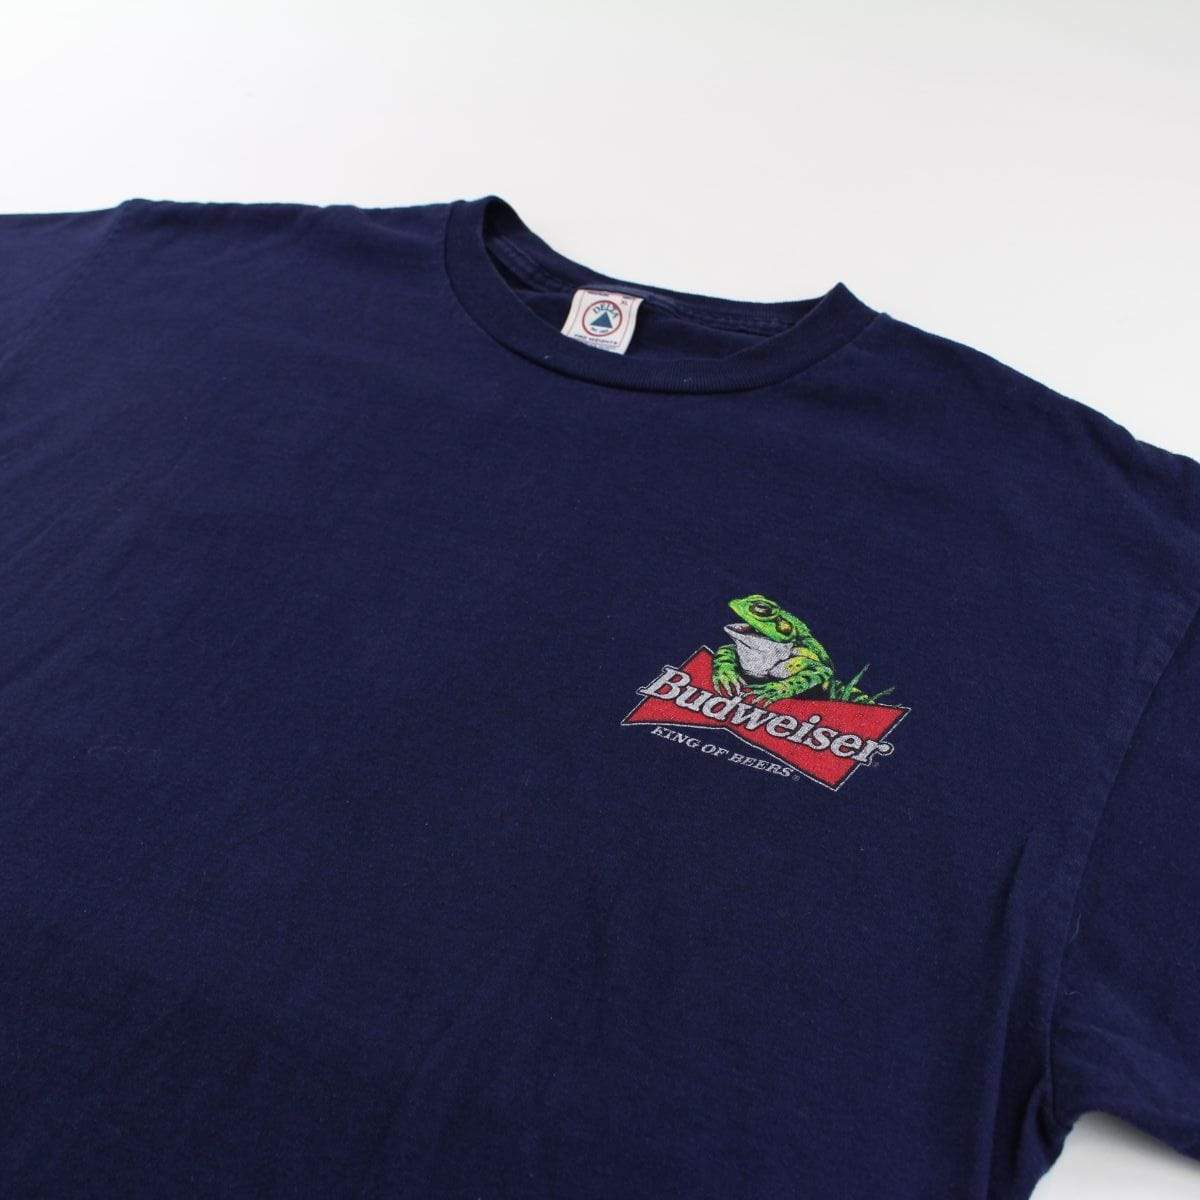 Budweiser This Buds For You Tee Navy - SaruGeneral